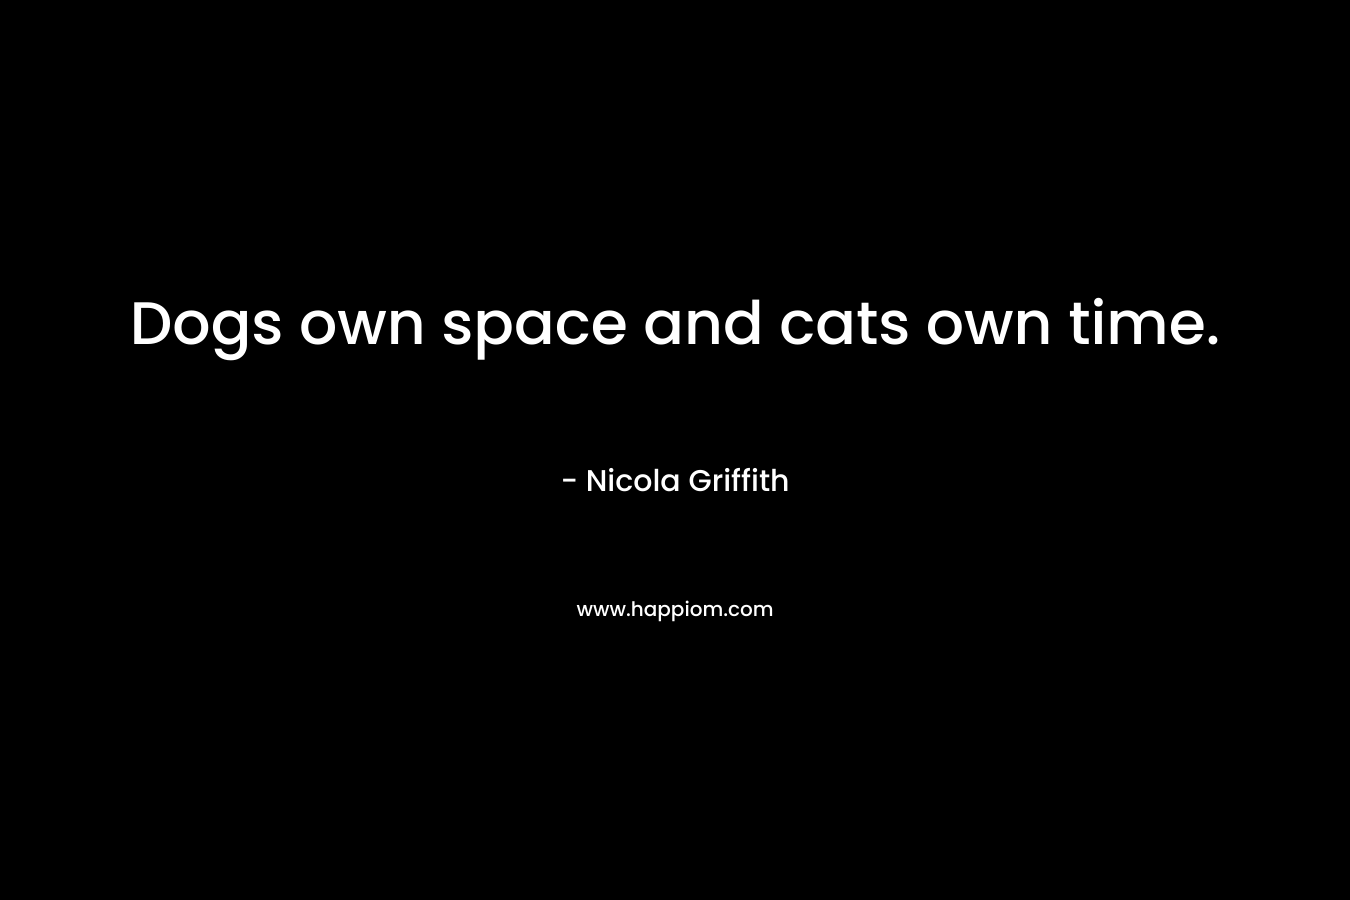 Dogs own space and cats own time.